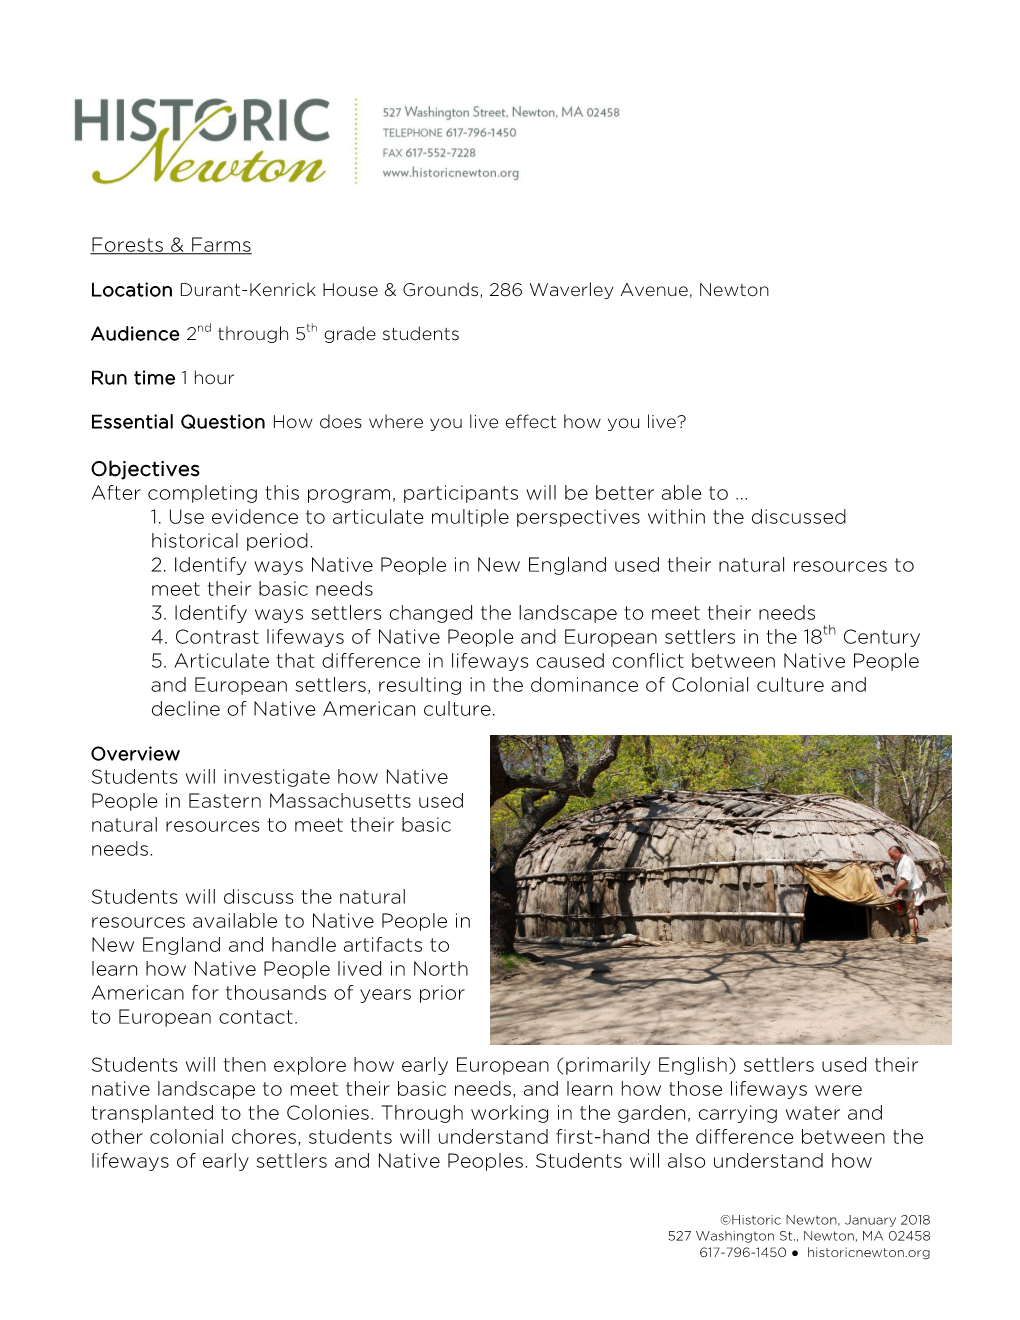 Forests and Farms Teacher Resources